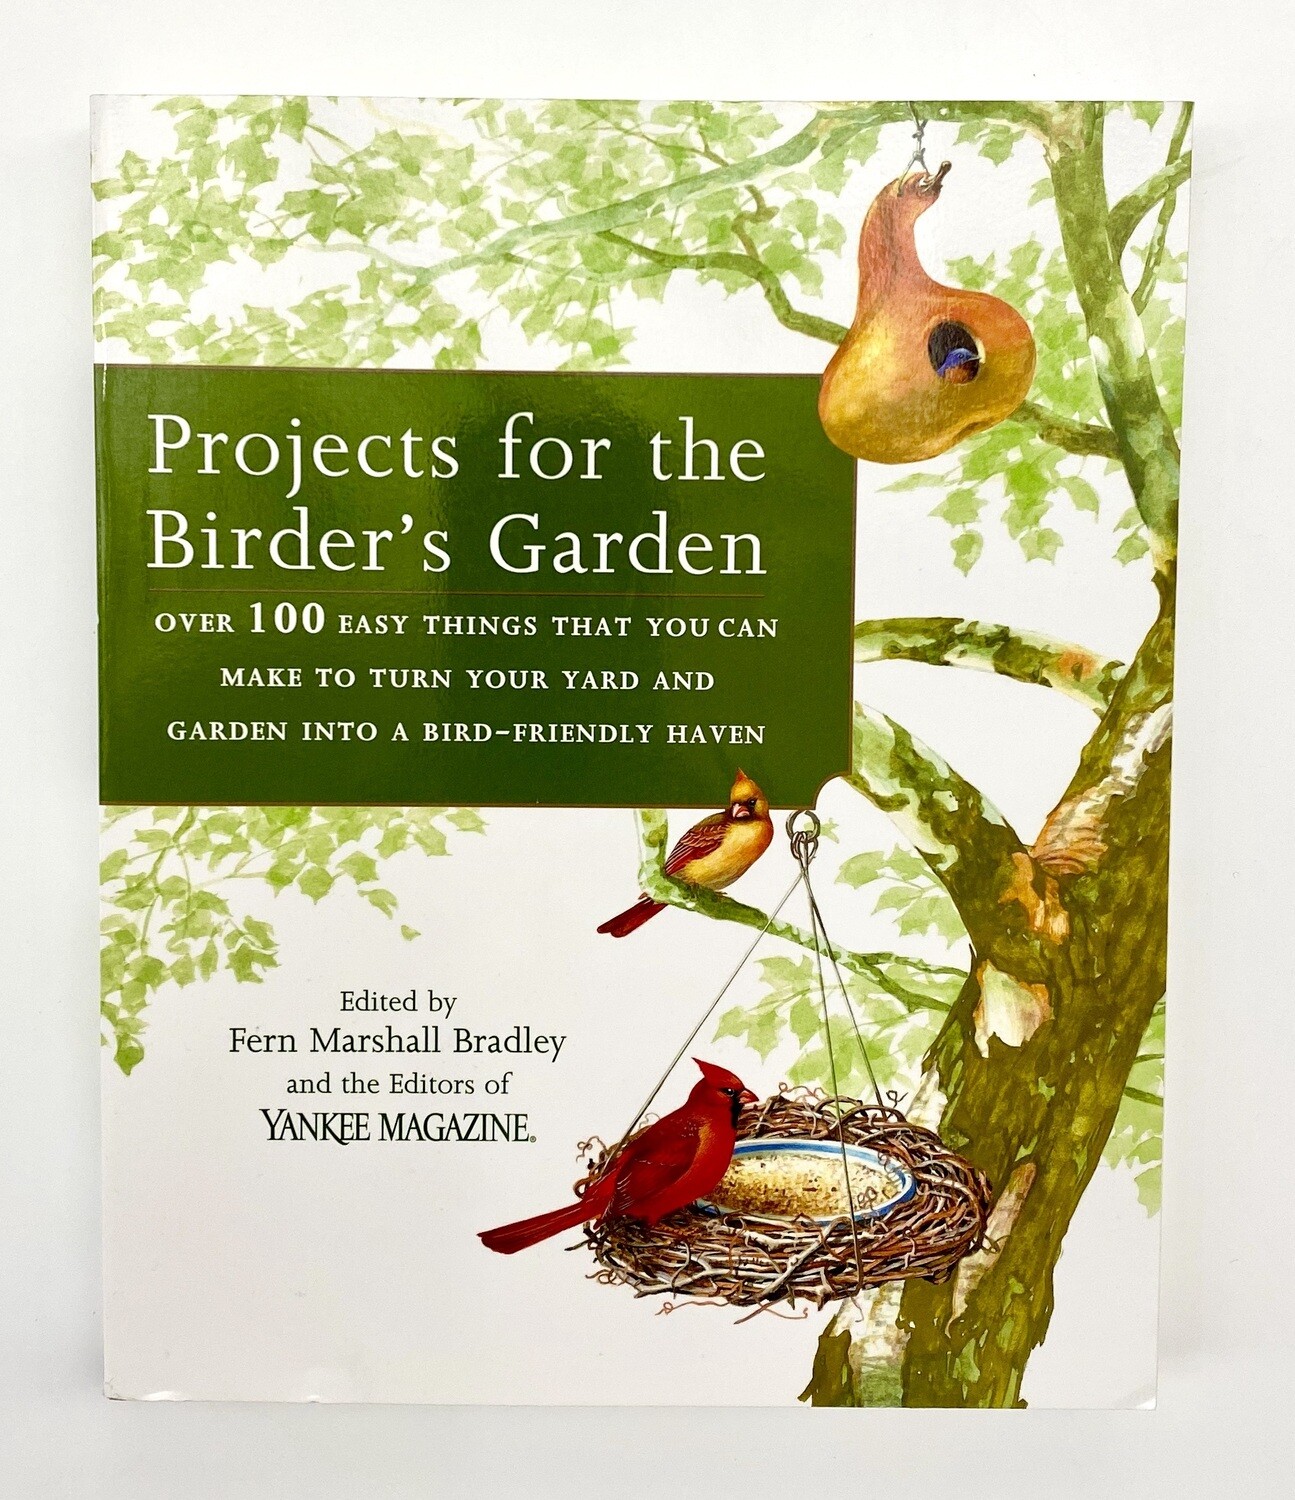 USED - Projects For The Birder&#39;s Garden: Over 100 Easy Things That You Can Make to Turn Your Yard and Garden Into a Bird-Friendly Haven, Bradley, Fern Marshall